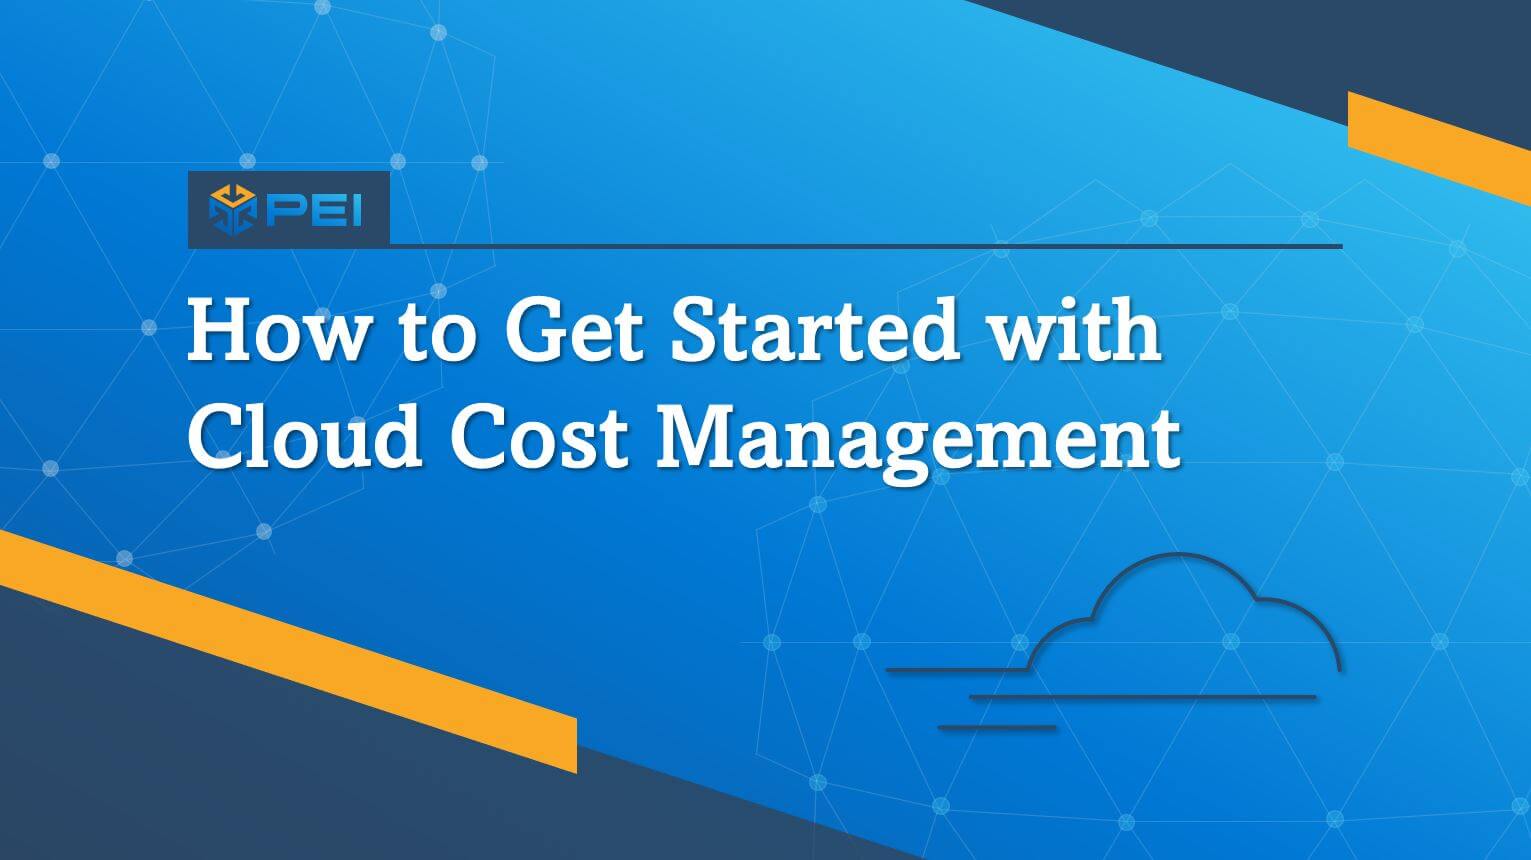 "How to Get Started with Cloud Cost Management" blue background